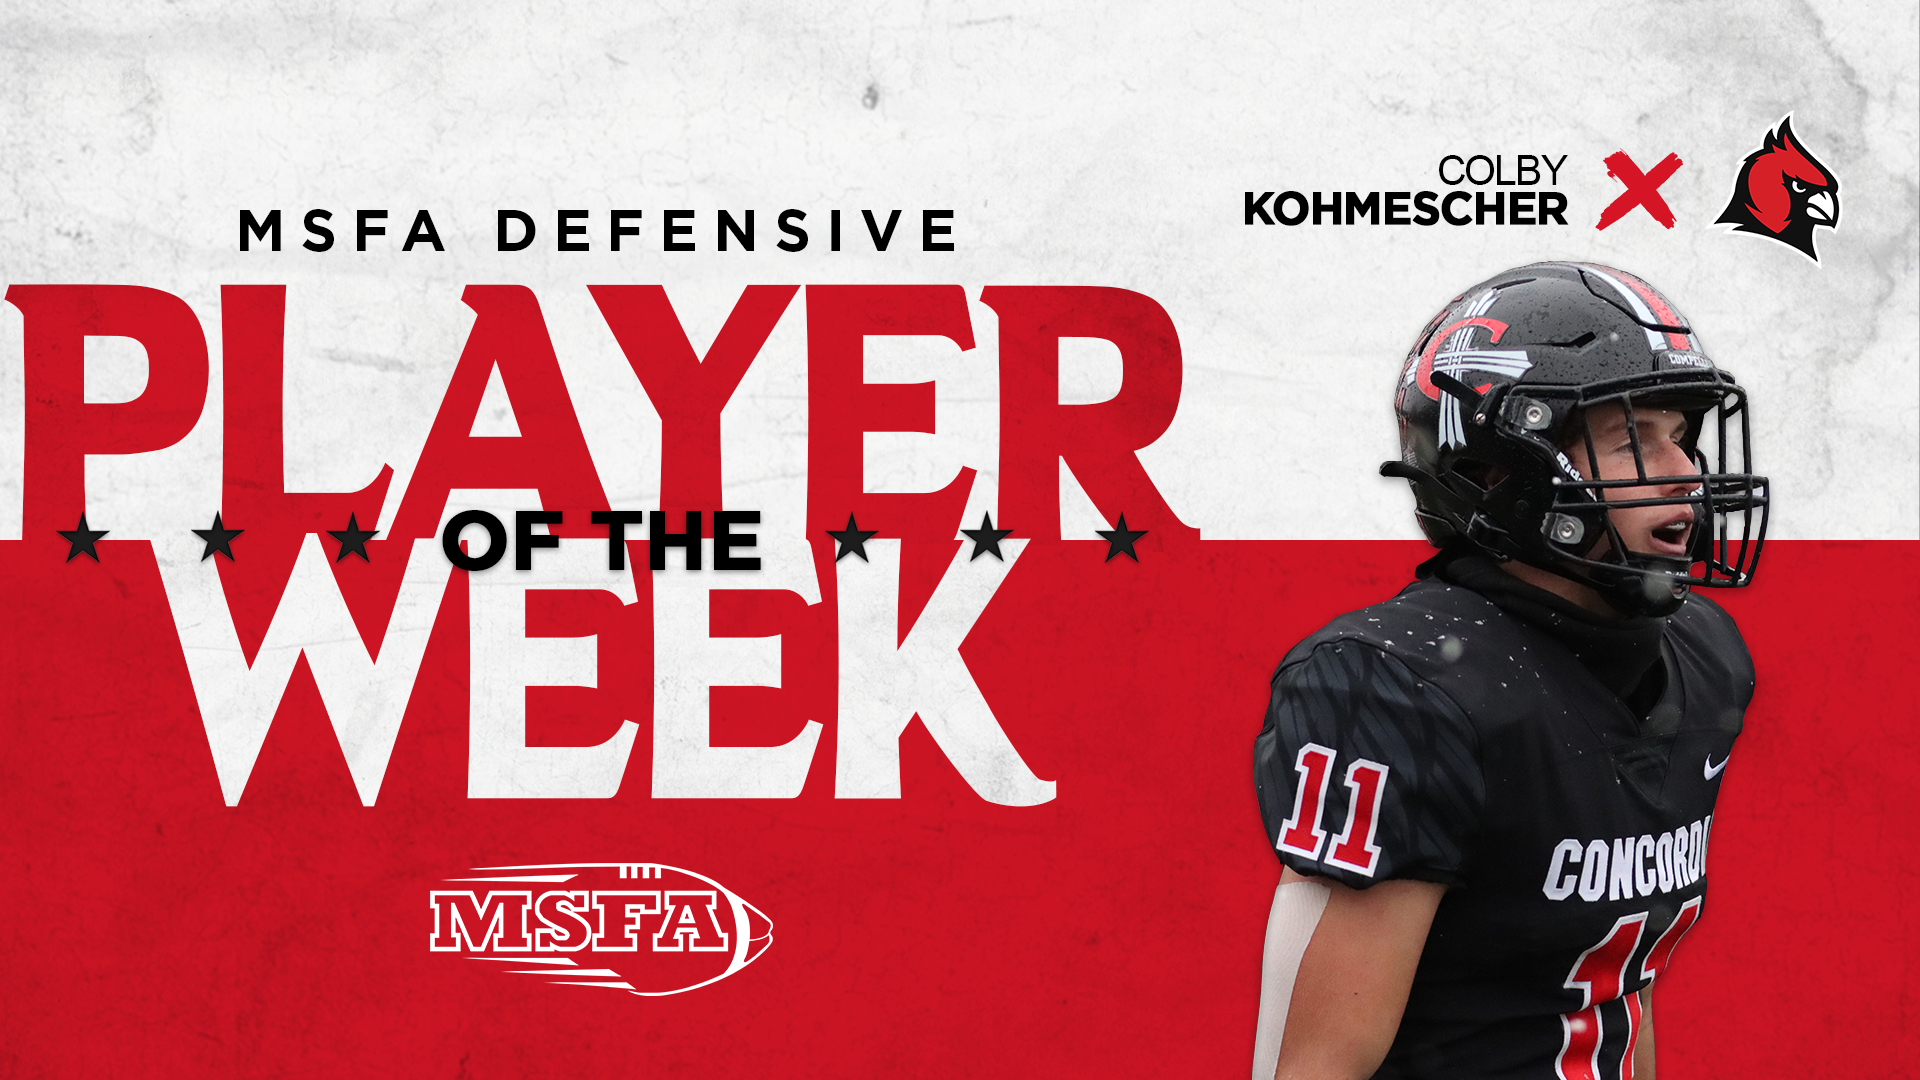 Football's Kohmescher takes home final MSFA Defensive Player of the Week